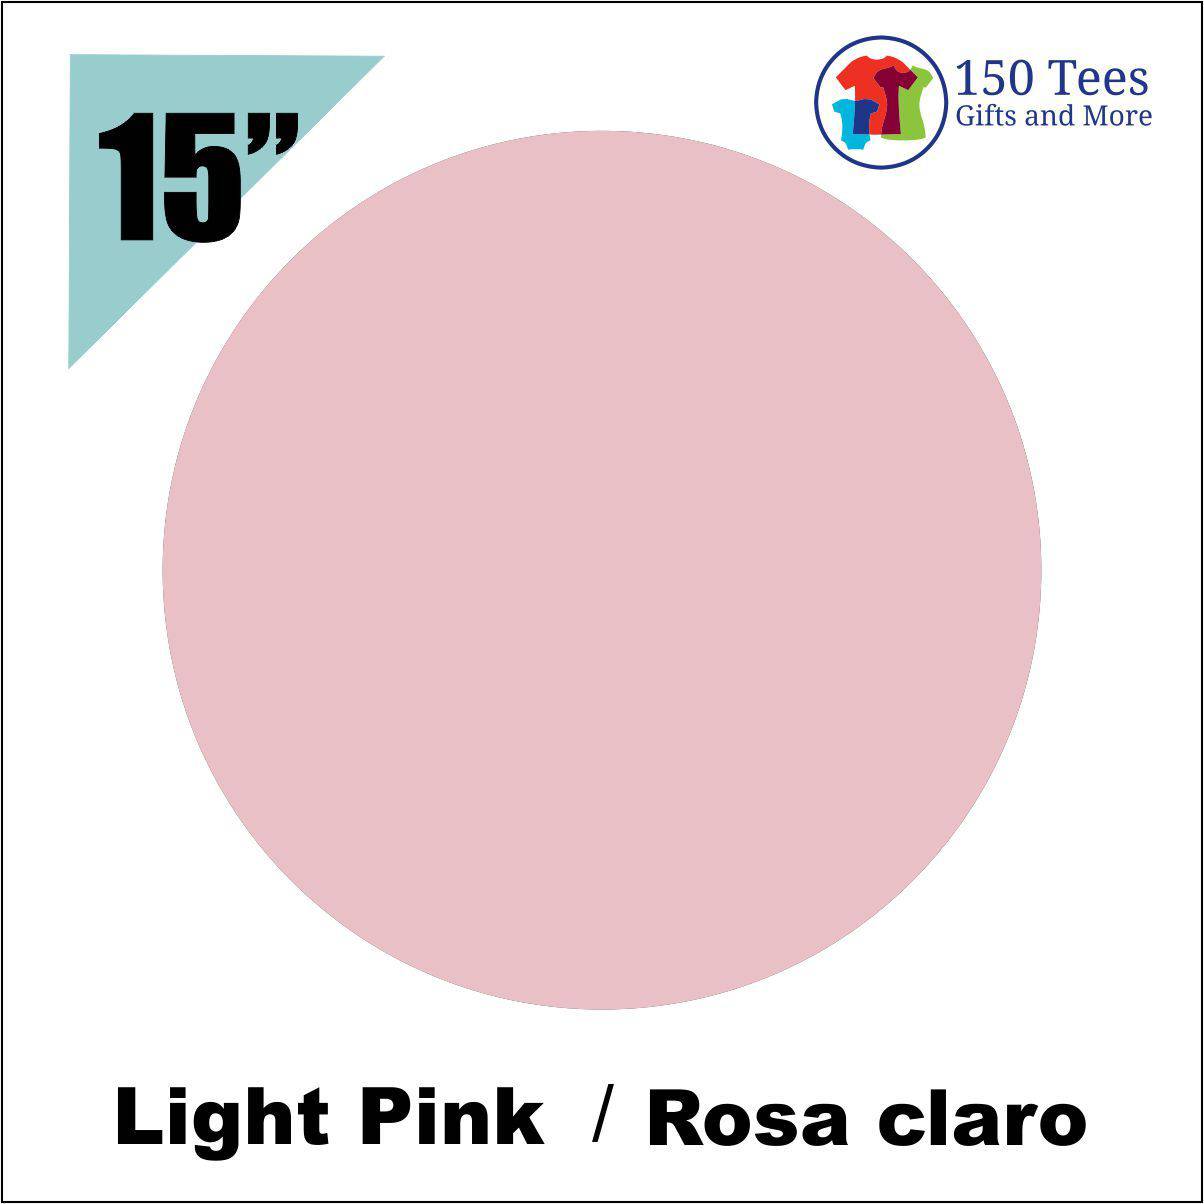 EasyWeed HTV 15" - Light Pink - 150 TEES GIFTS & MORE